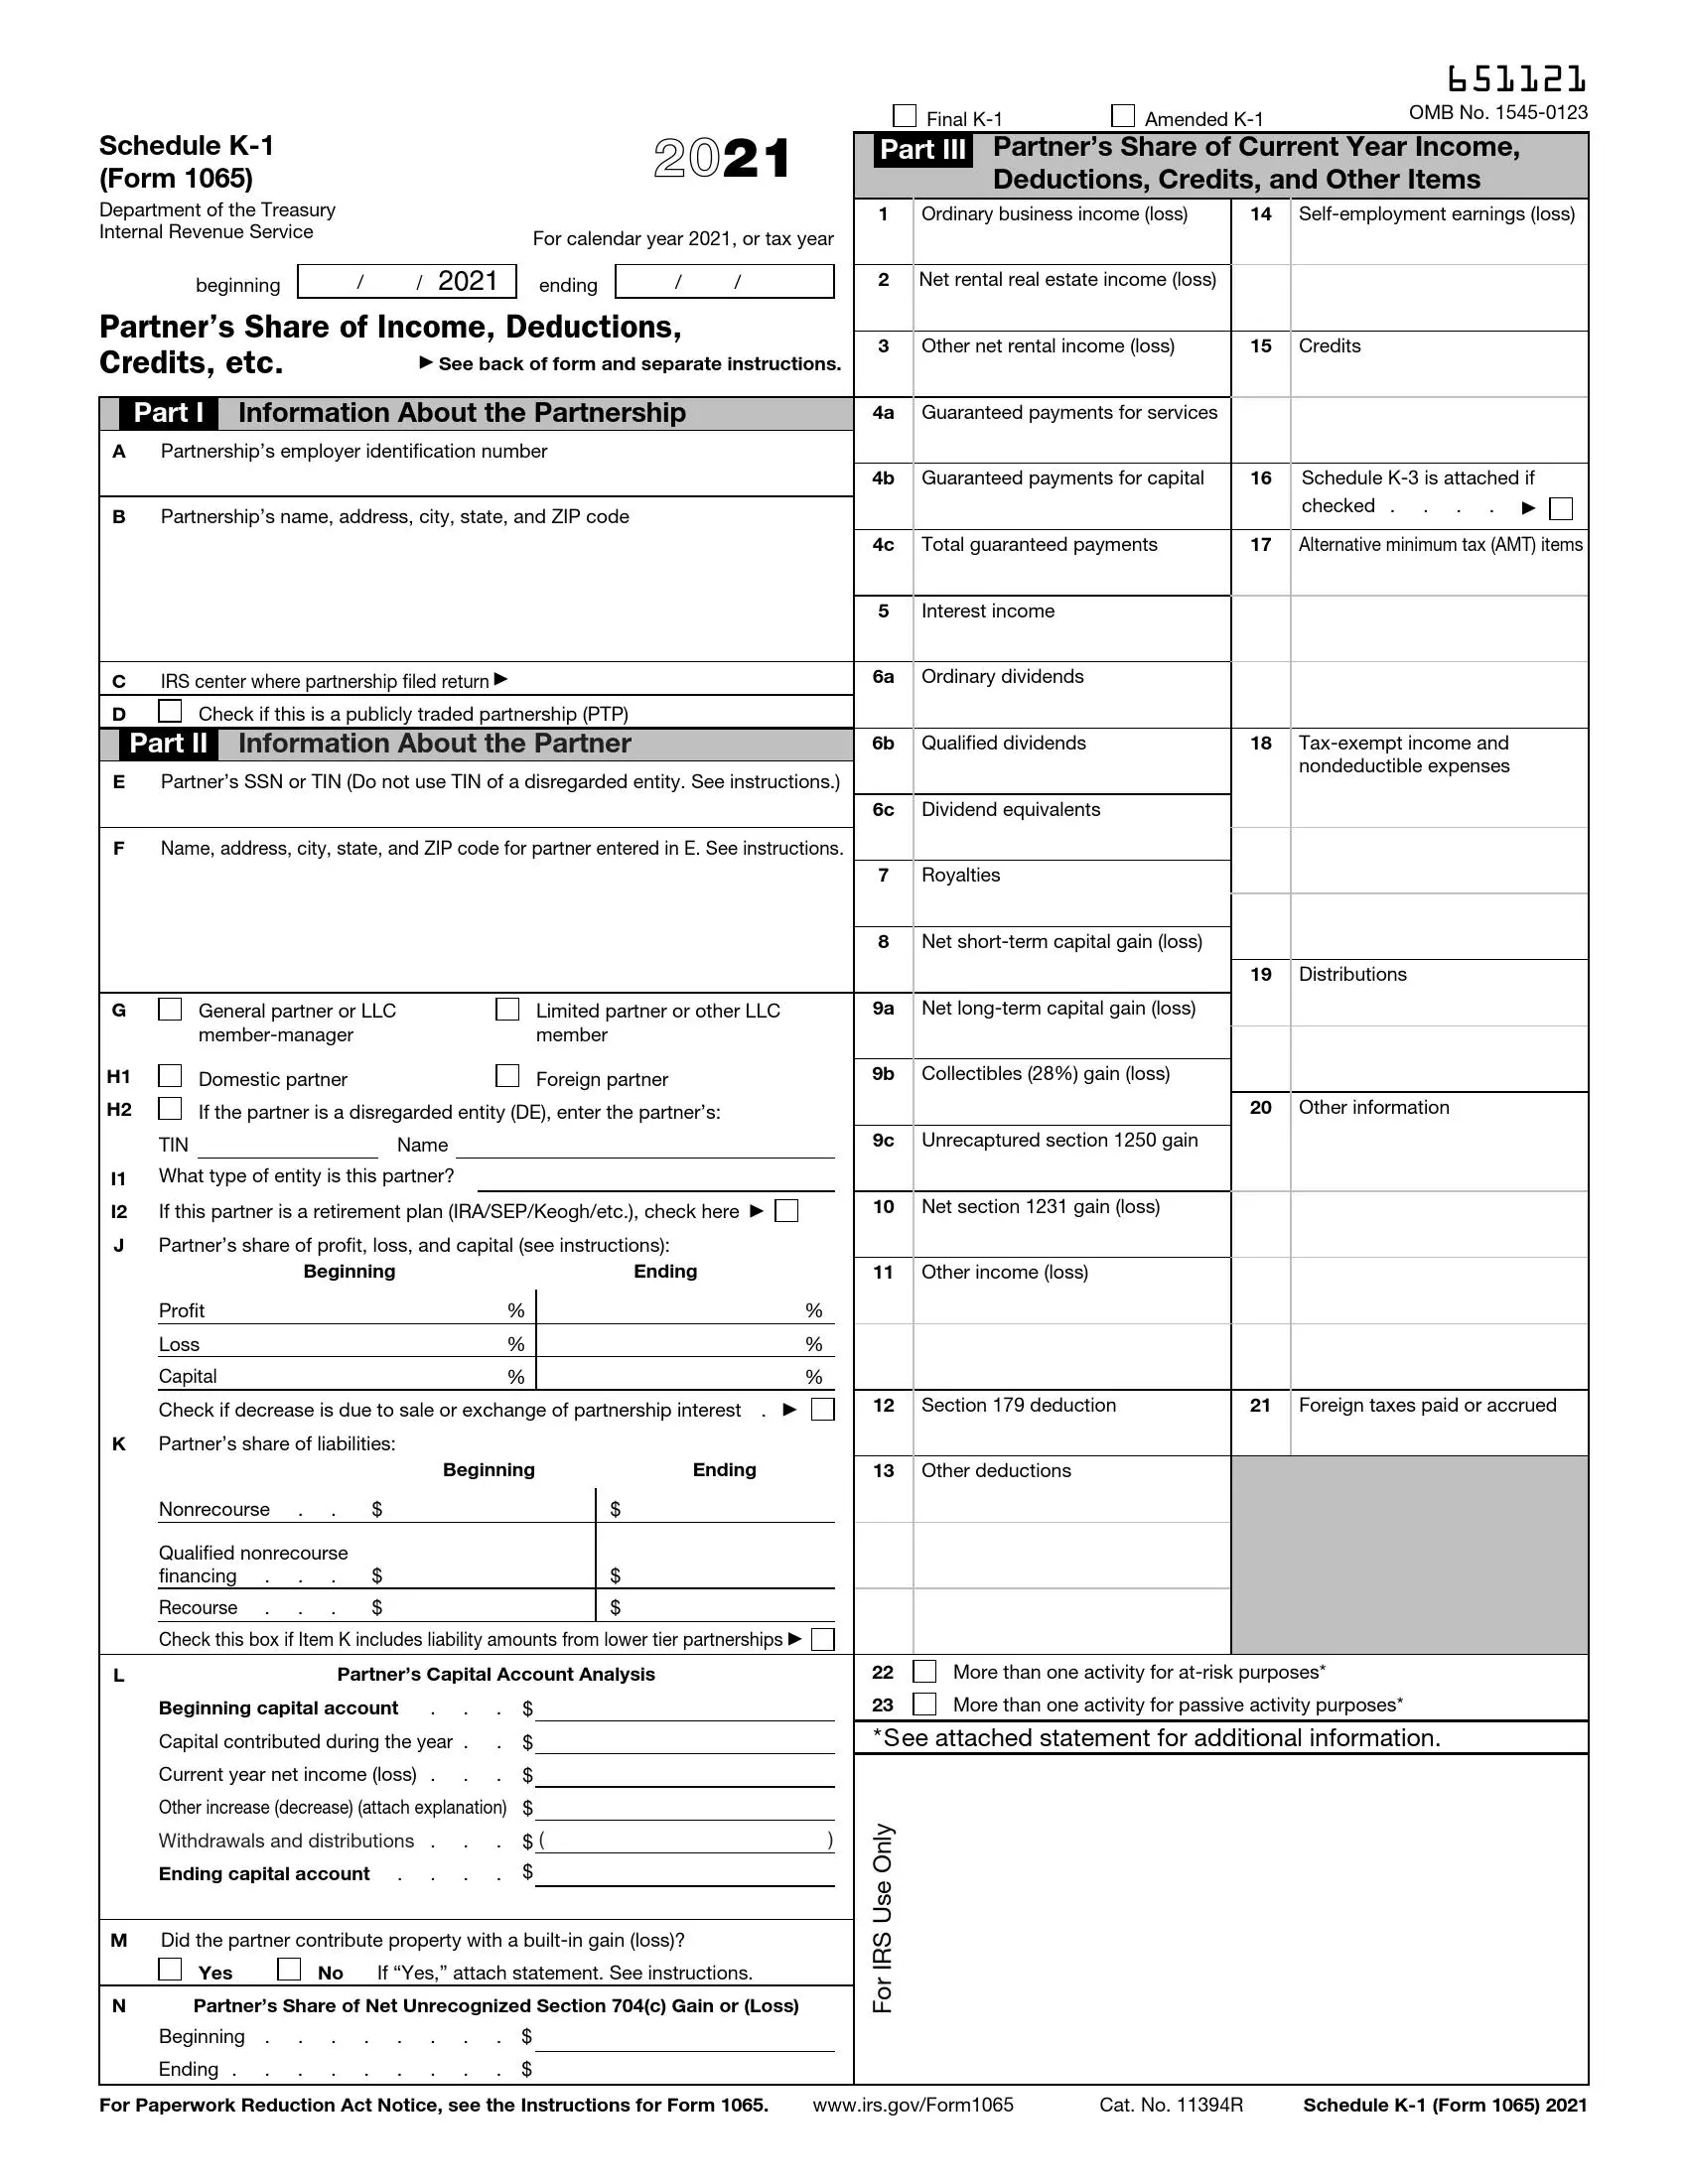 irs schedule k 1 form 1065 2021 preview